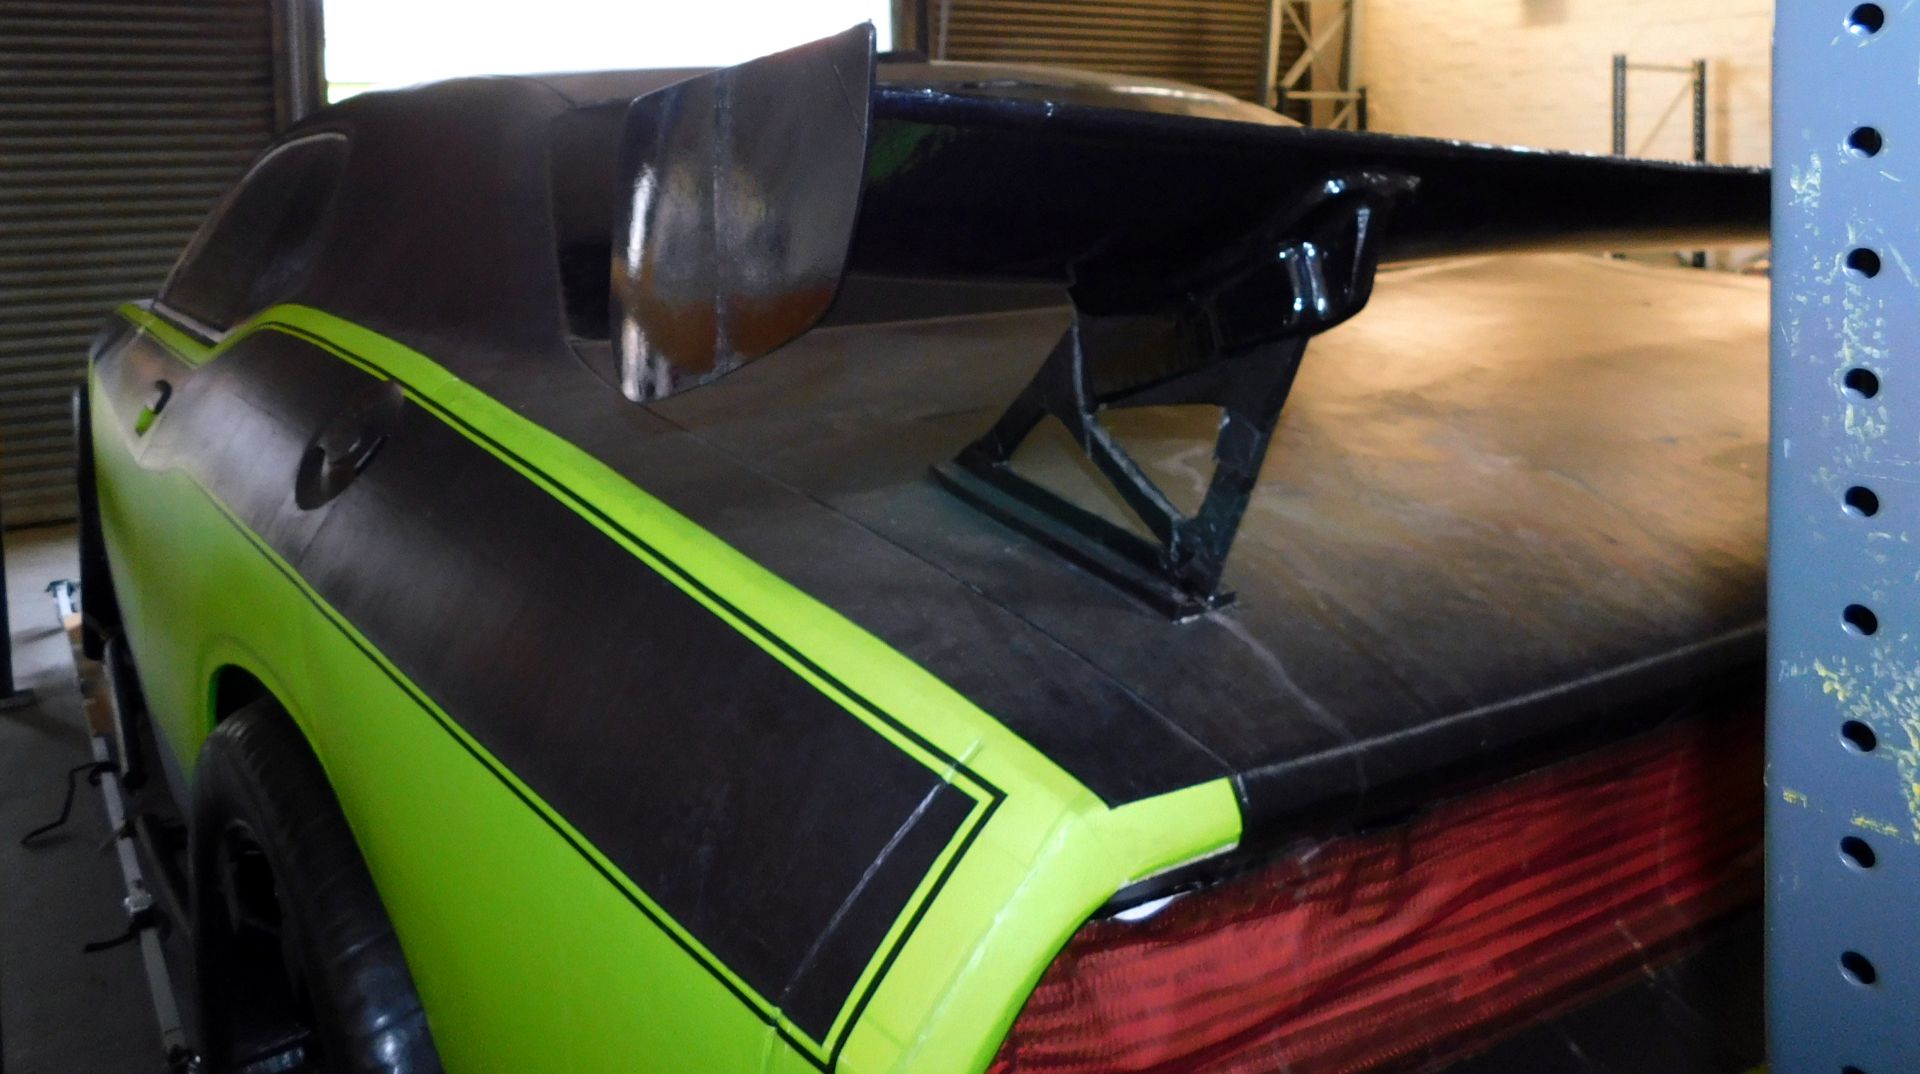 “Gear Factor” Helium Filled Flying Full Size Green/Black Dodge Challenger Model with 4 Electric - Image 8 of 13